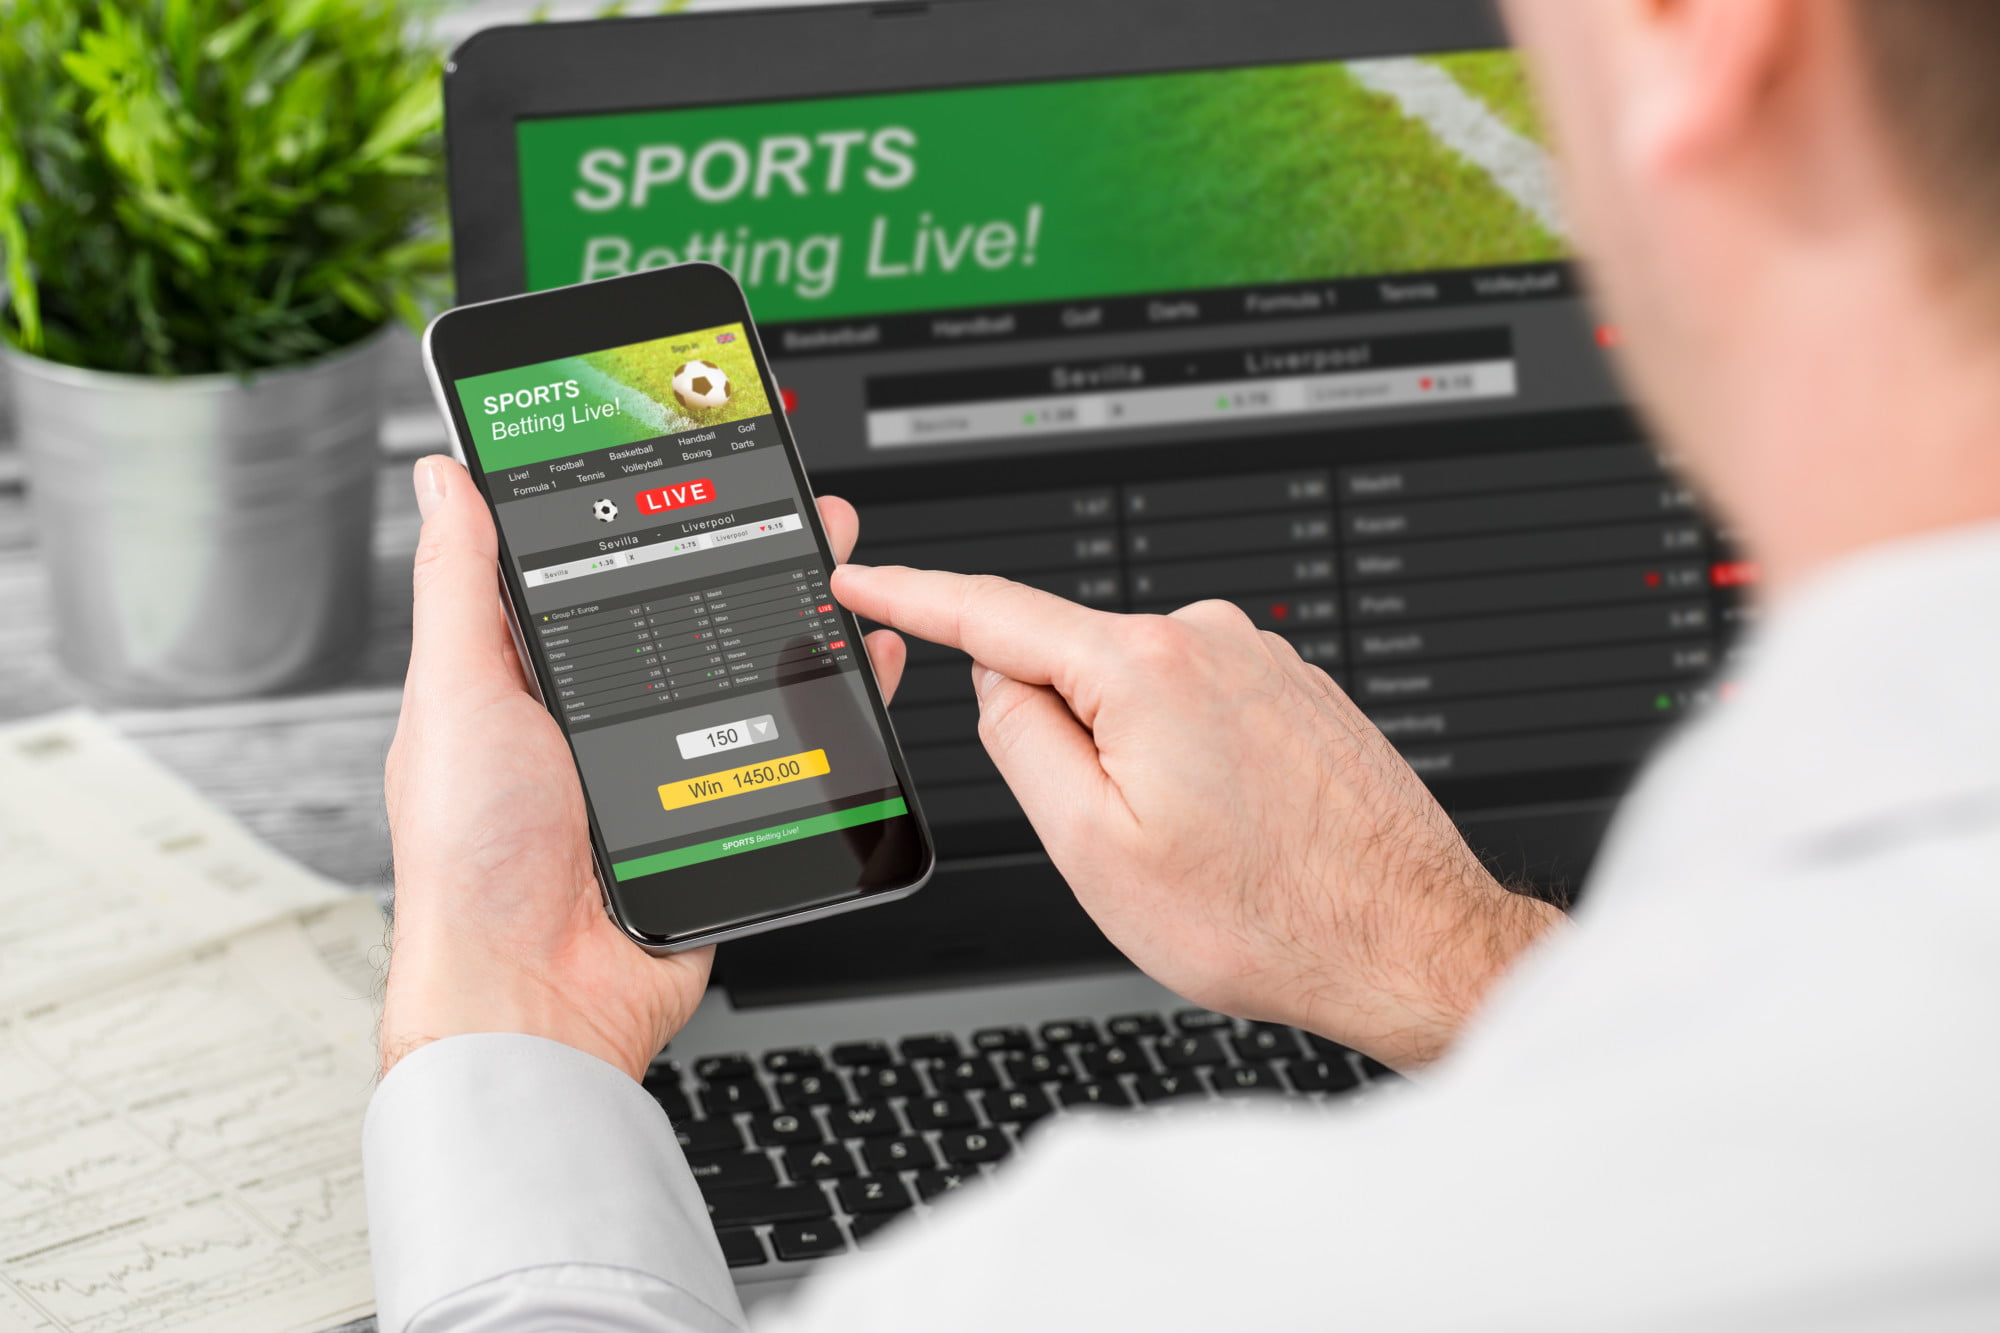 Did you know that not all sports bets are placed equal these days? Here are the latest sports betting strategies that actually work.